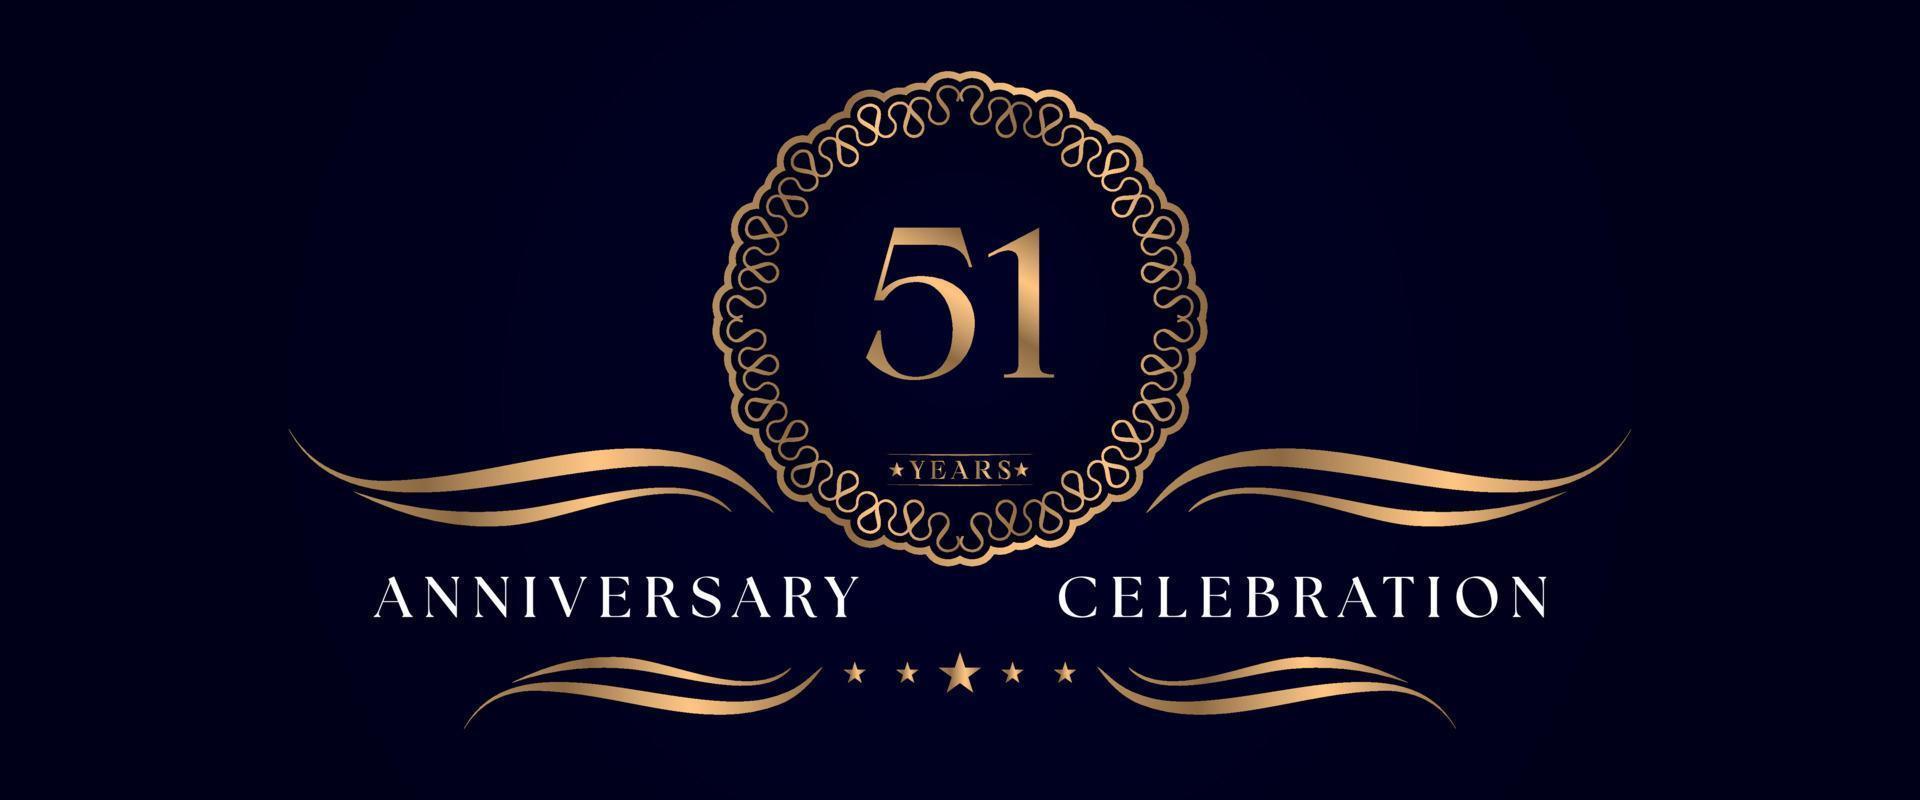 51 years anniversary celebration with elegant circle frame isolated on dark blue background. Vector design for greeting card, birthday party, wedding, event party, ceremony. 51 years Anniversary logo.